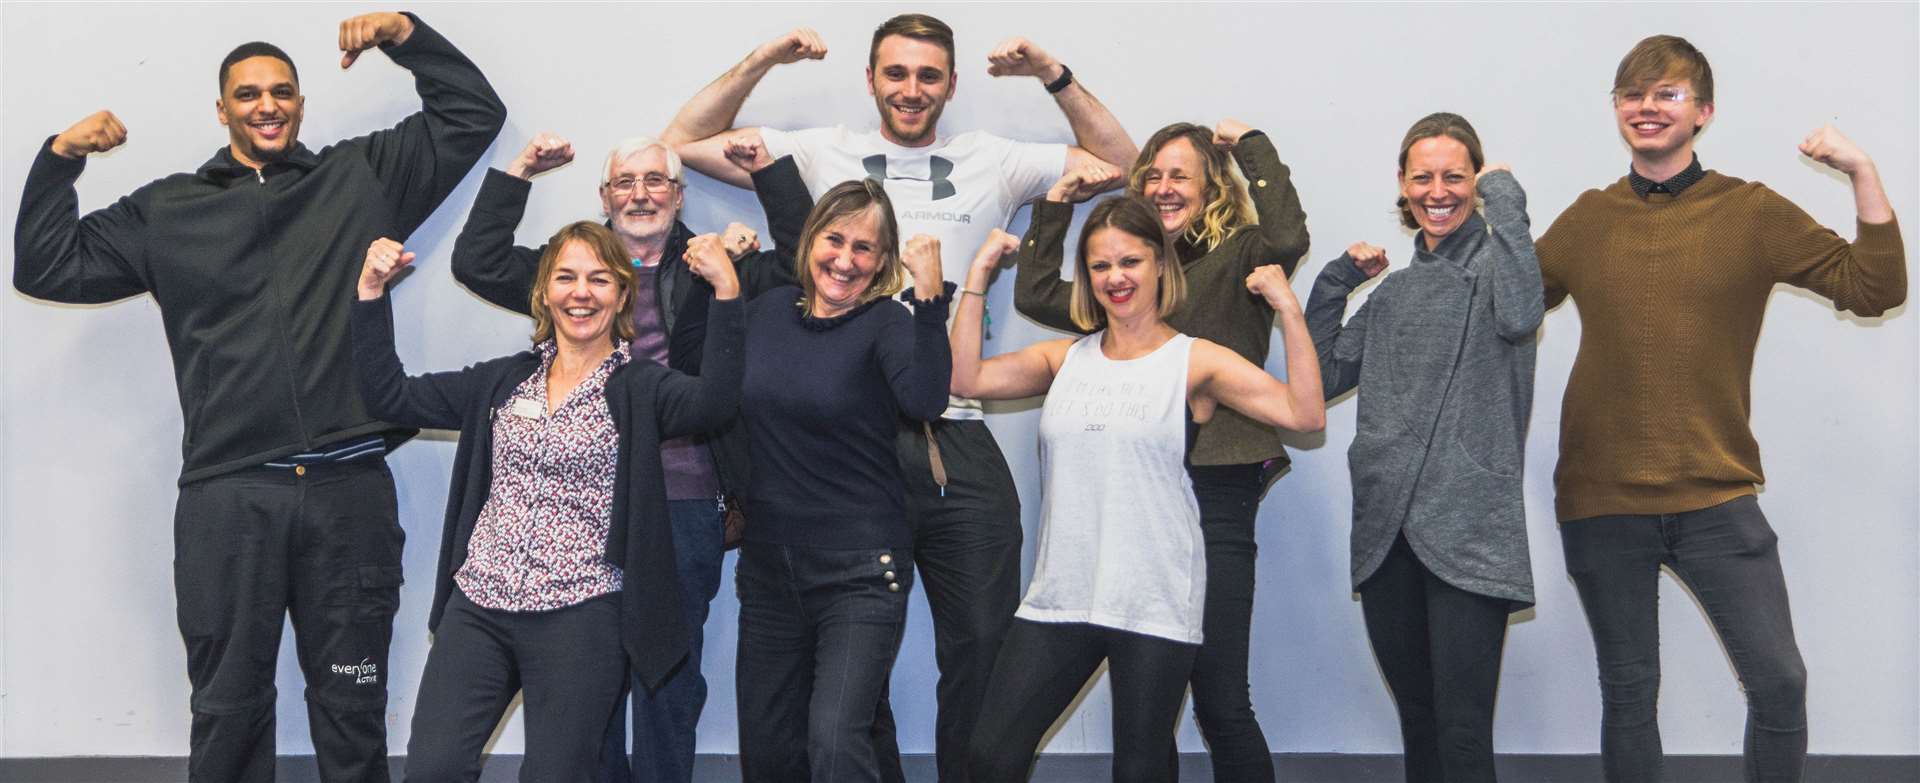 Inverness fitness instructor Andrew Morris (fifth left) and Professor Gill Hubbard, of UHI, (seventh left) were part of the research team involved in the project.